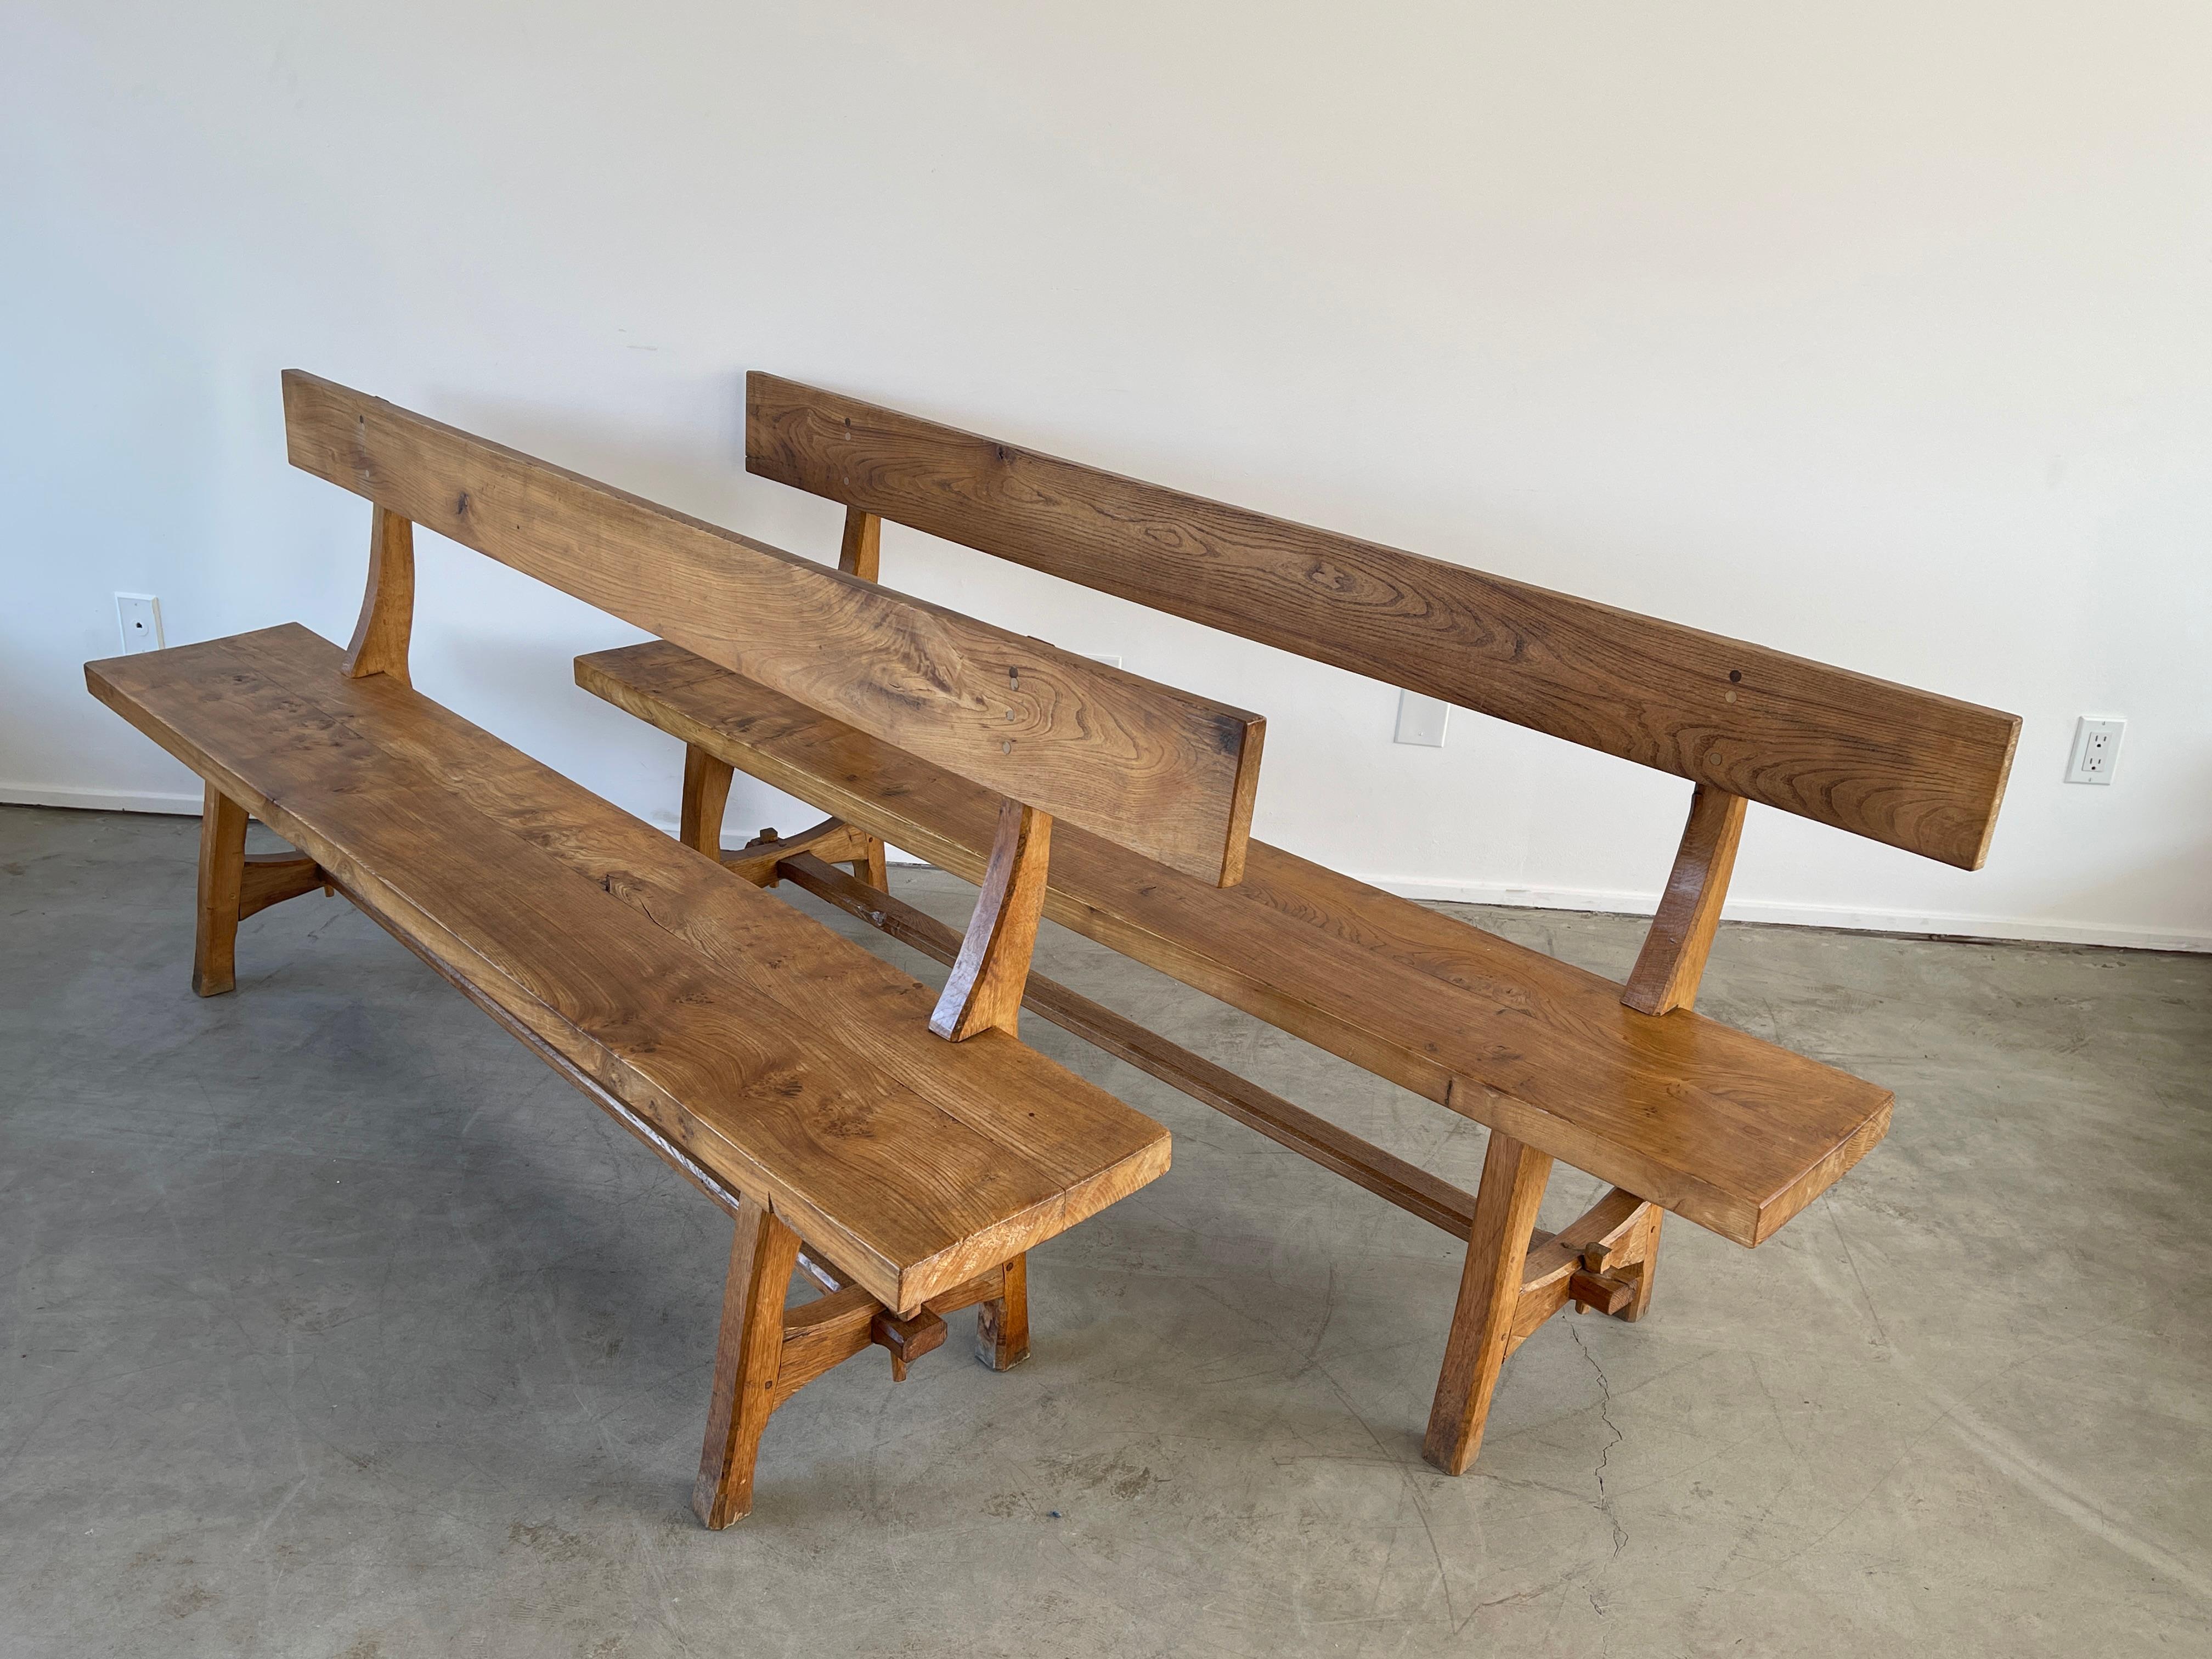 Pair of French oak benches with backs
Great lines / patina to wood 
Priced individually.